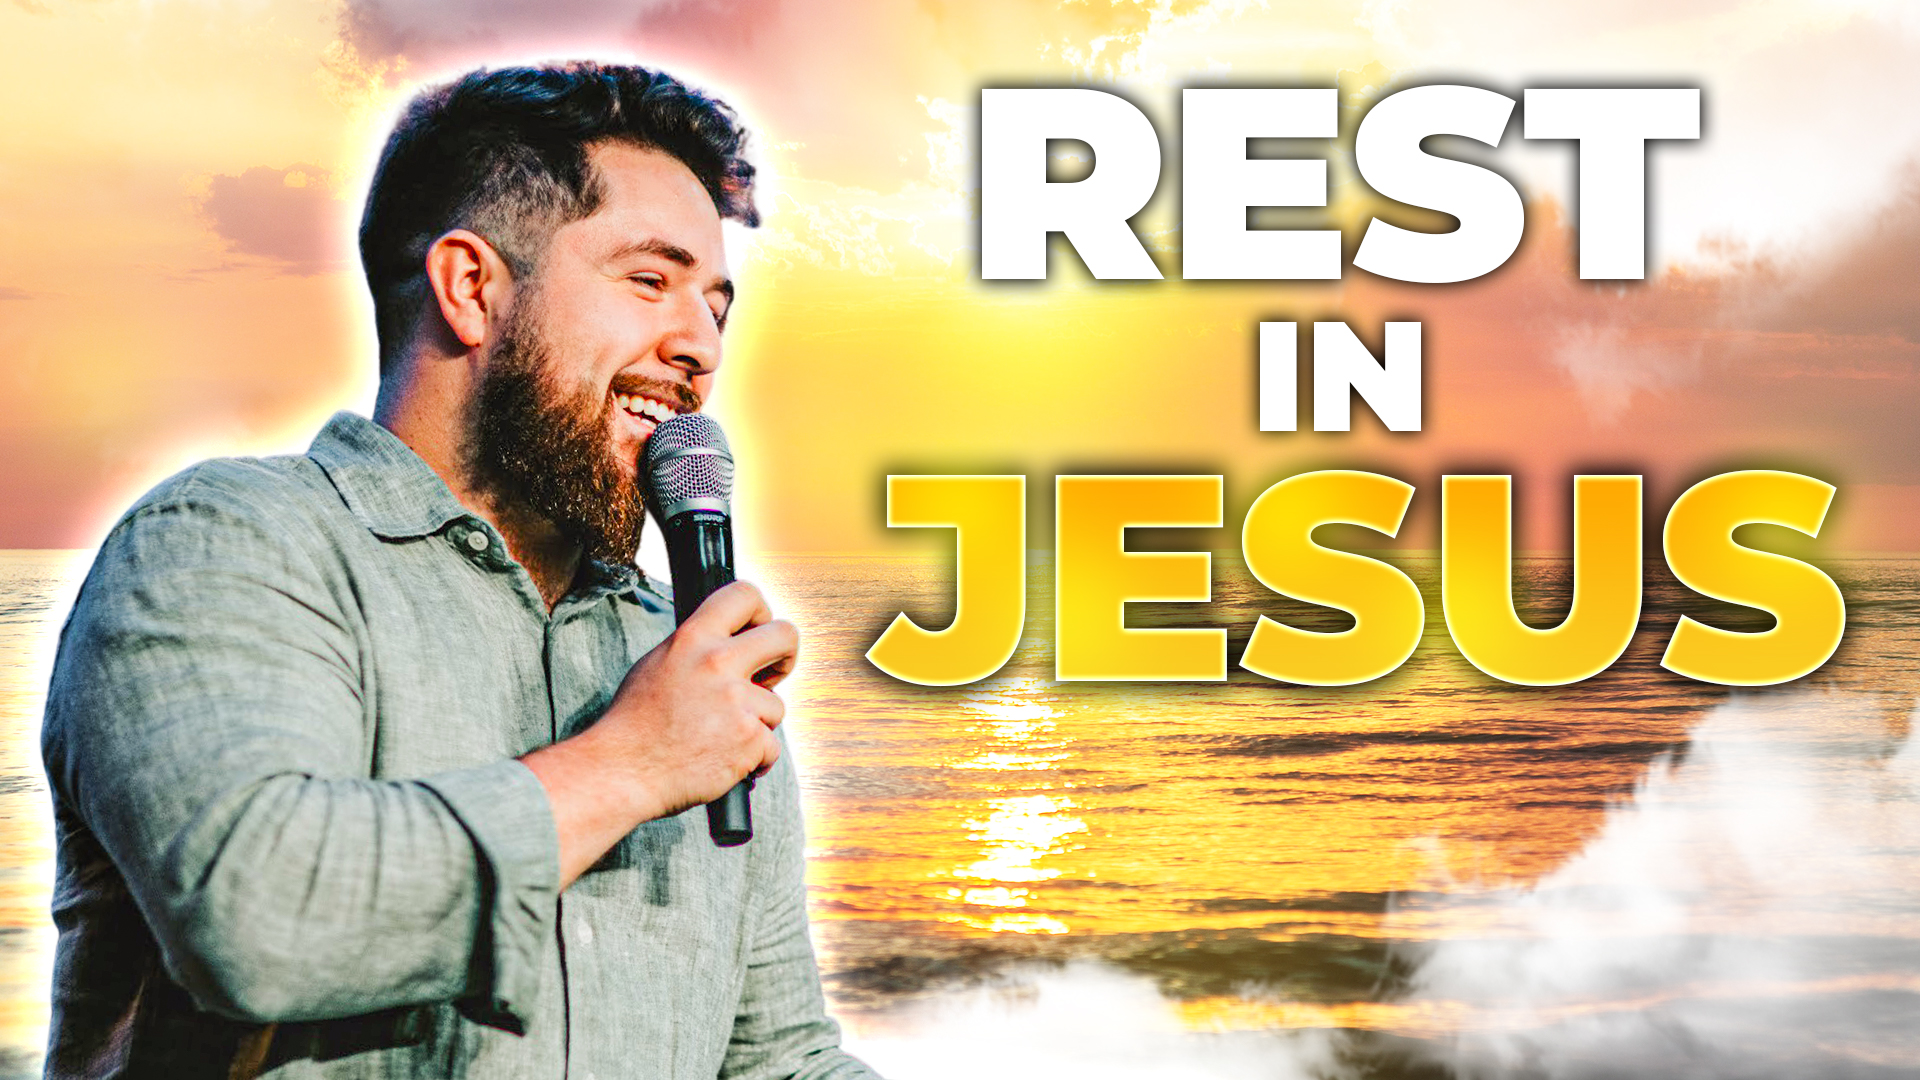 Featured image for “Rest in Jesus”